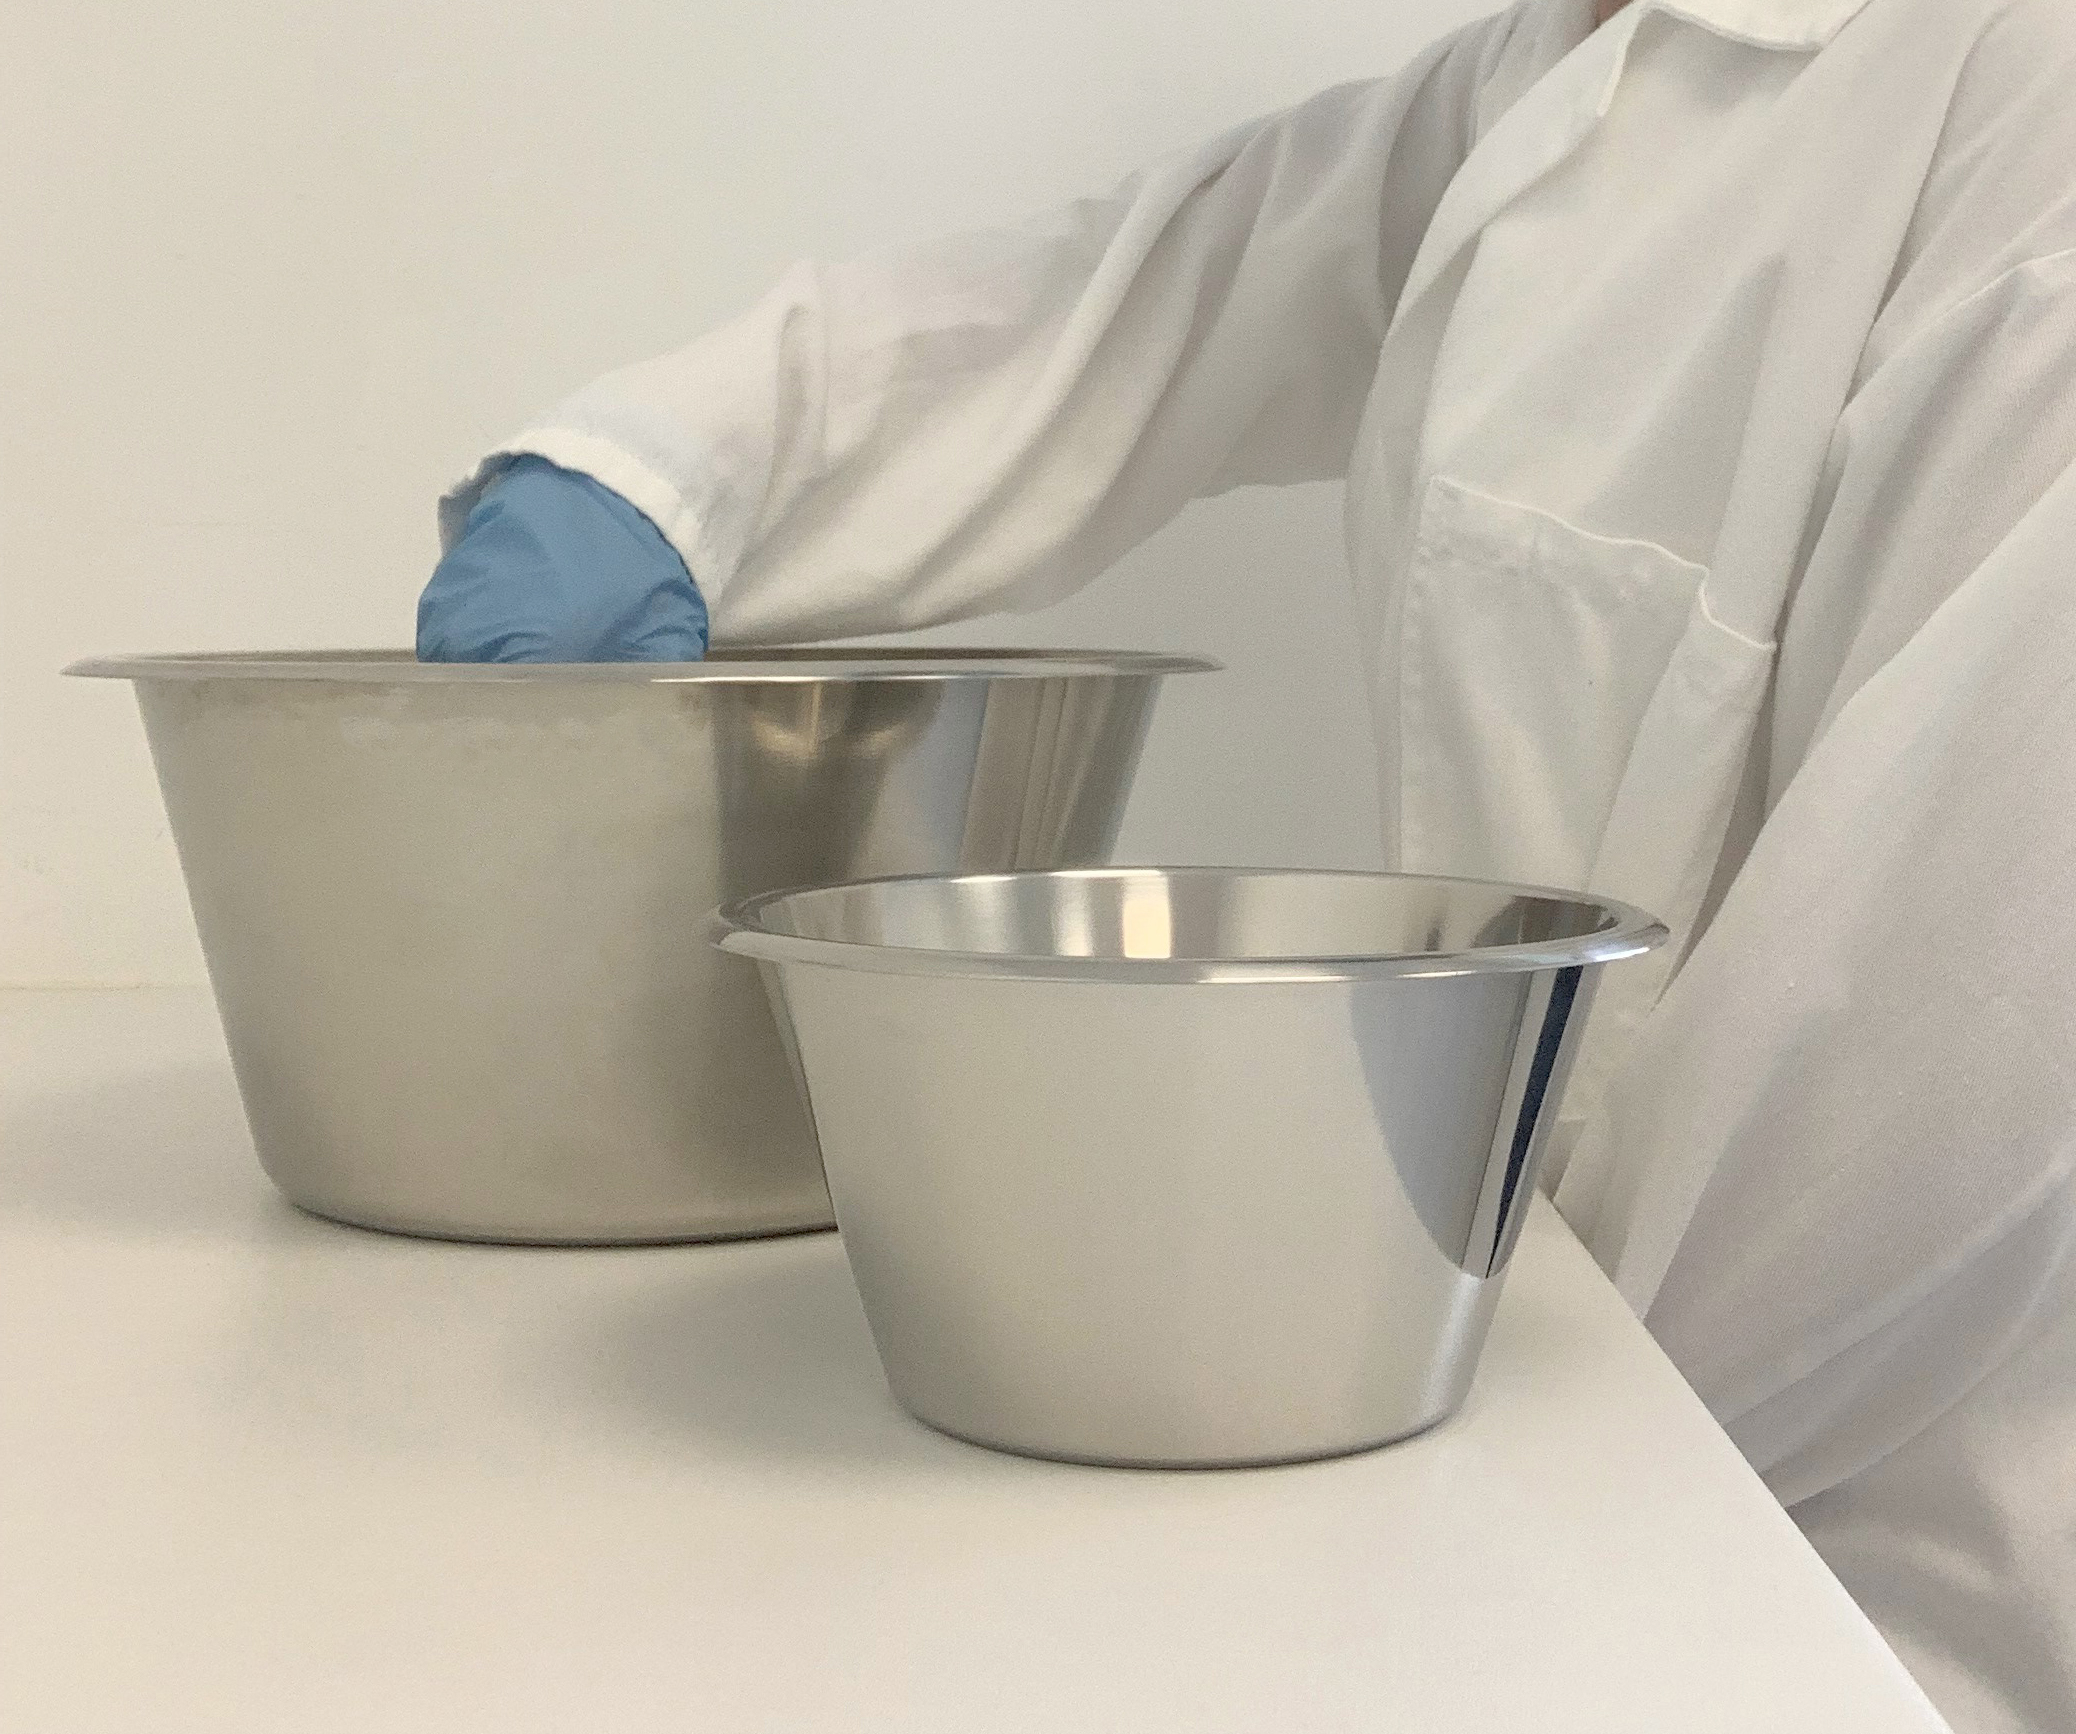 Cleanroom & Laboratory Stainless Steel Bowls